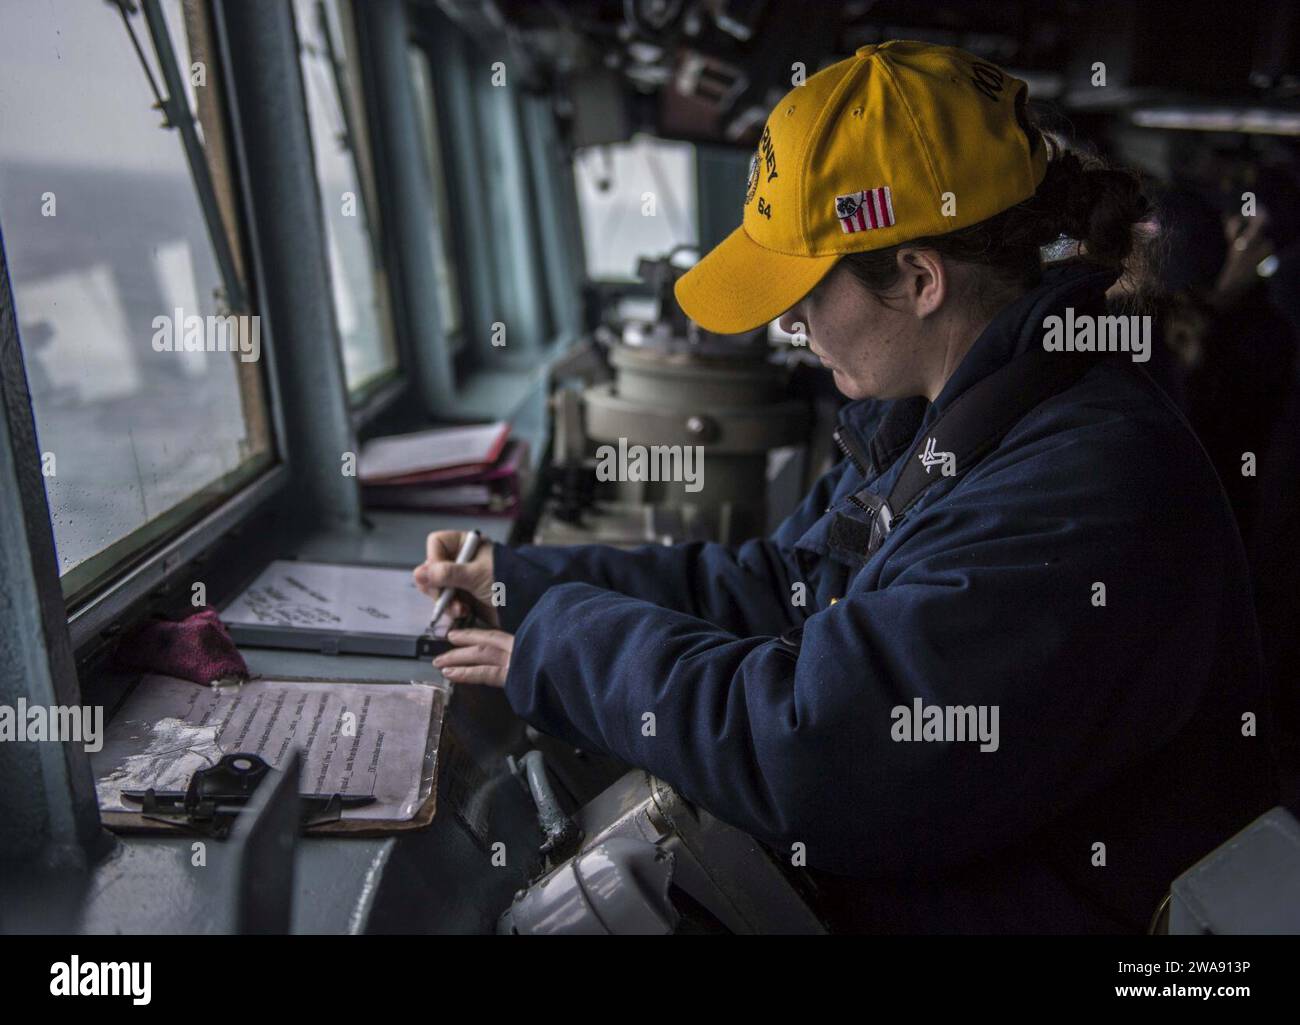 US military forces. 180224KA046-0024  BLACK SEA (Feb. 24, 2018) – Ensign Rachel Sell stands watch as officer of the deck aboard the Arleigh Burke-class guided-missile destroyer USS Carney (DDG 64) in the Black Sea, Feb. 24, 2018. Carney, forward-deployed to Rota, Spain, is on its fourth patrol in the U.S. 6th Fleet area of operations in support of regional allies and partners, and U.S. national security interests in Europe. (U.S. Navy photo by Mass Communication Specialist 2nd Class James R. Turner/Released) Stock Photo